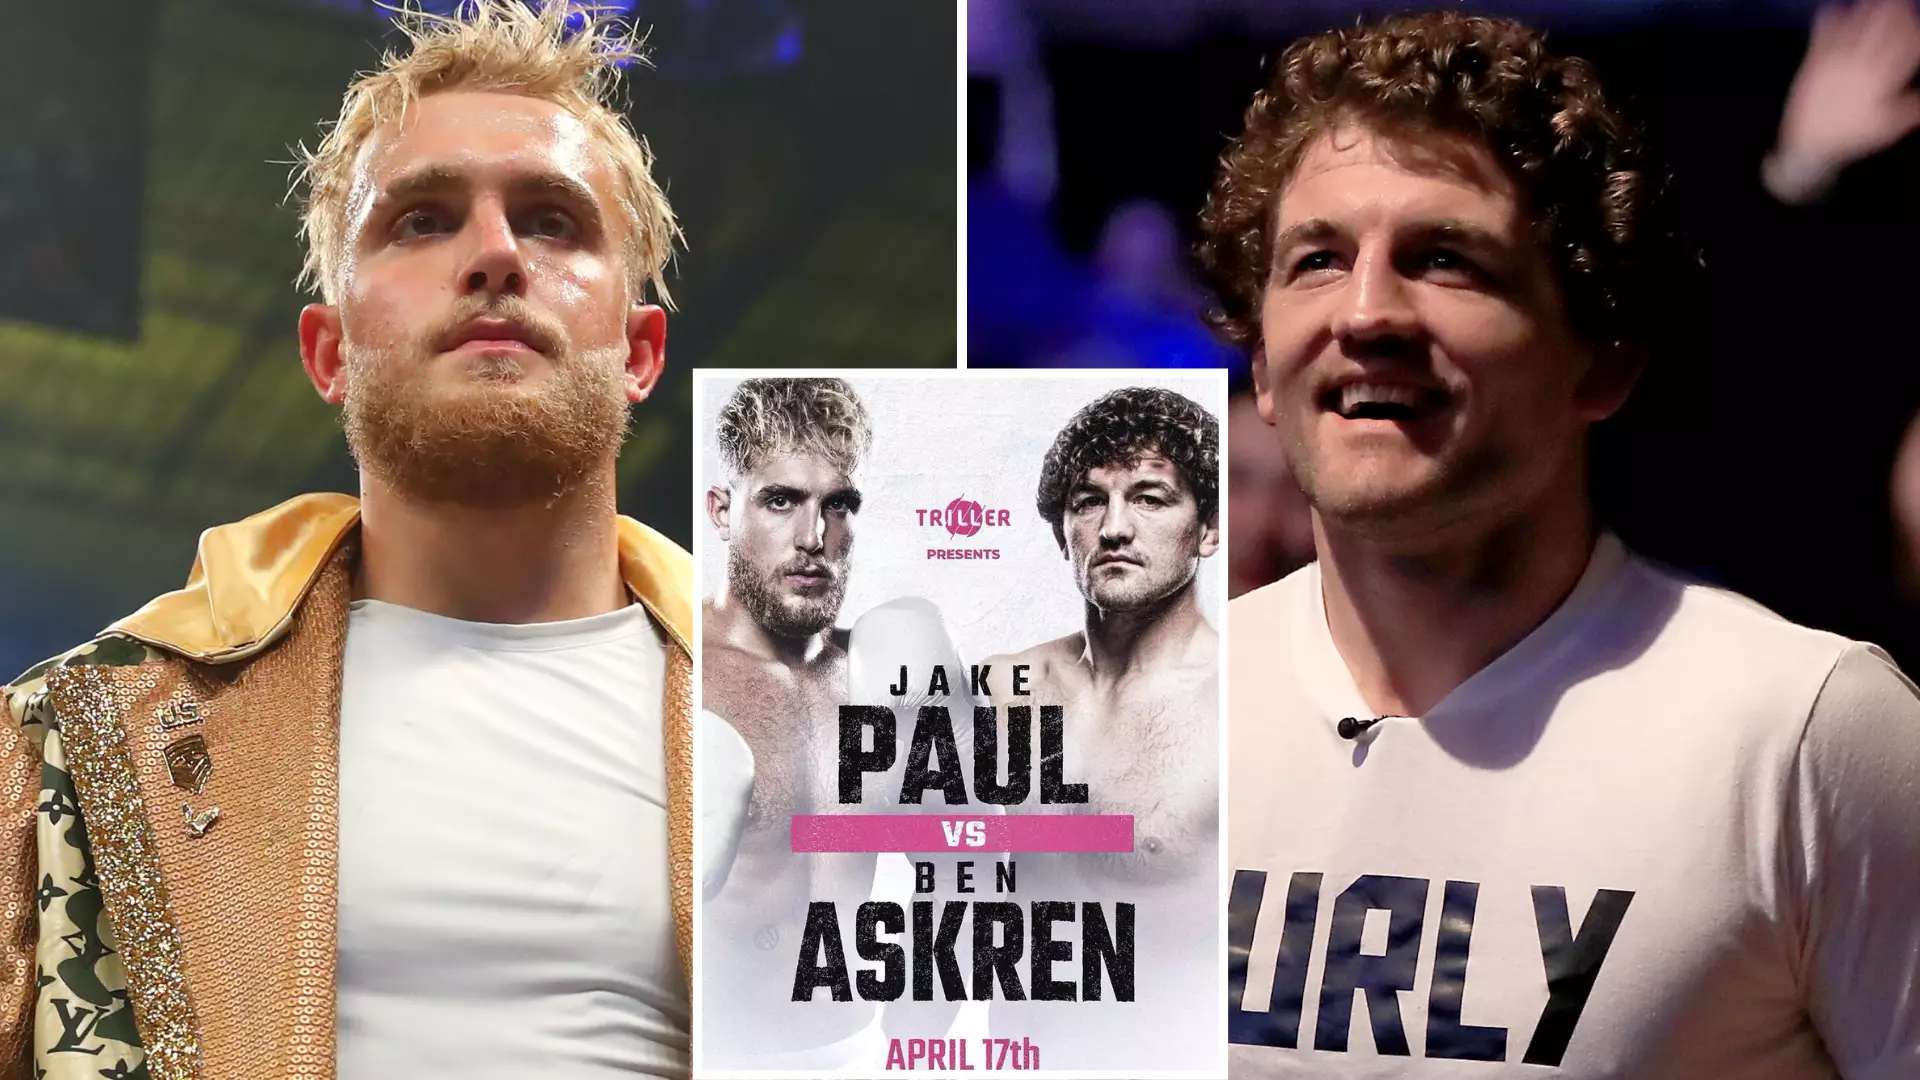 'Jake Paul Will Get Mauled And Ragdolled By Ben Askren In Their Upcoming Fight'